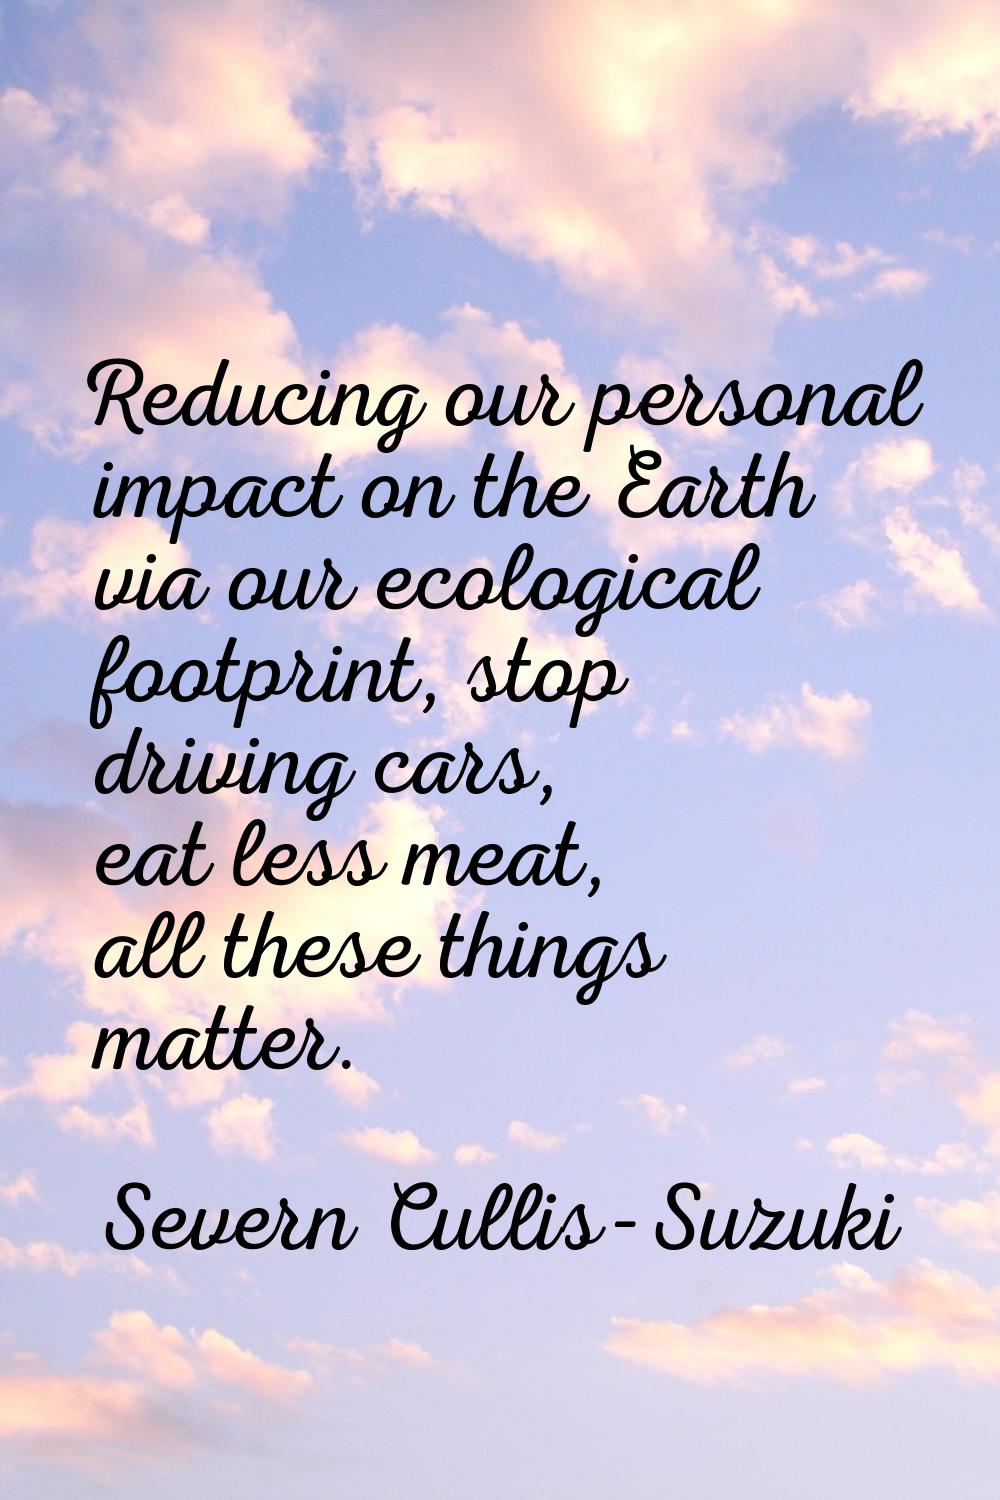 Reducing our personal impact on the Earth via our ecological footprint, stop driving cars, eat less